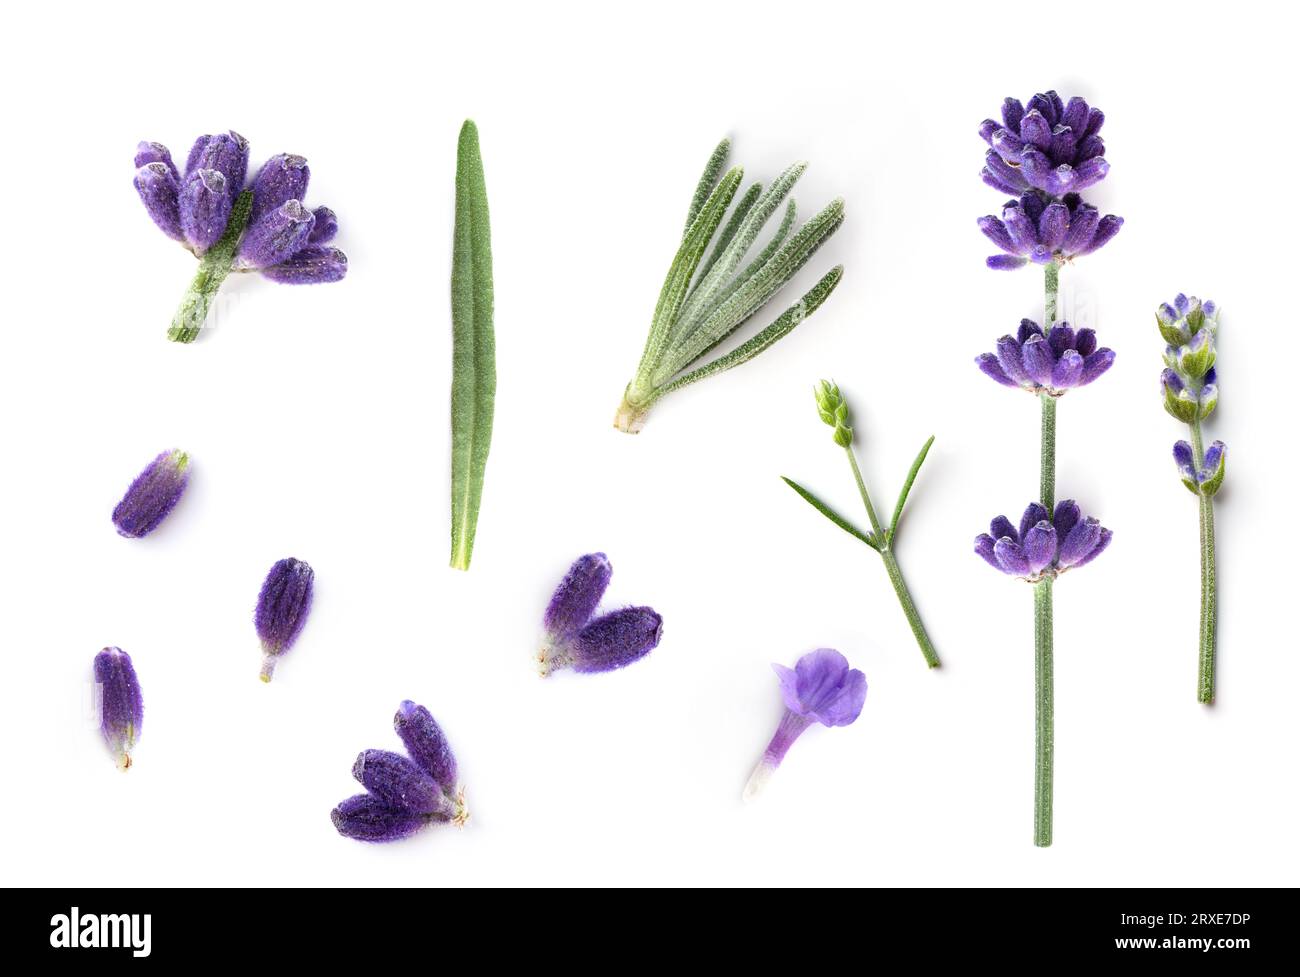 Collection of Lavender flowers isolated on white background. Lavender flower design elements for alternative and herbal medicine and beauty therapy. Stock Photo